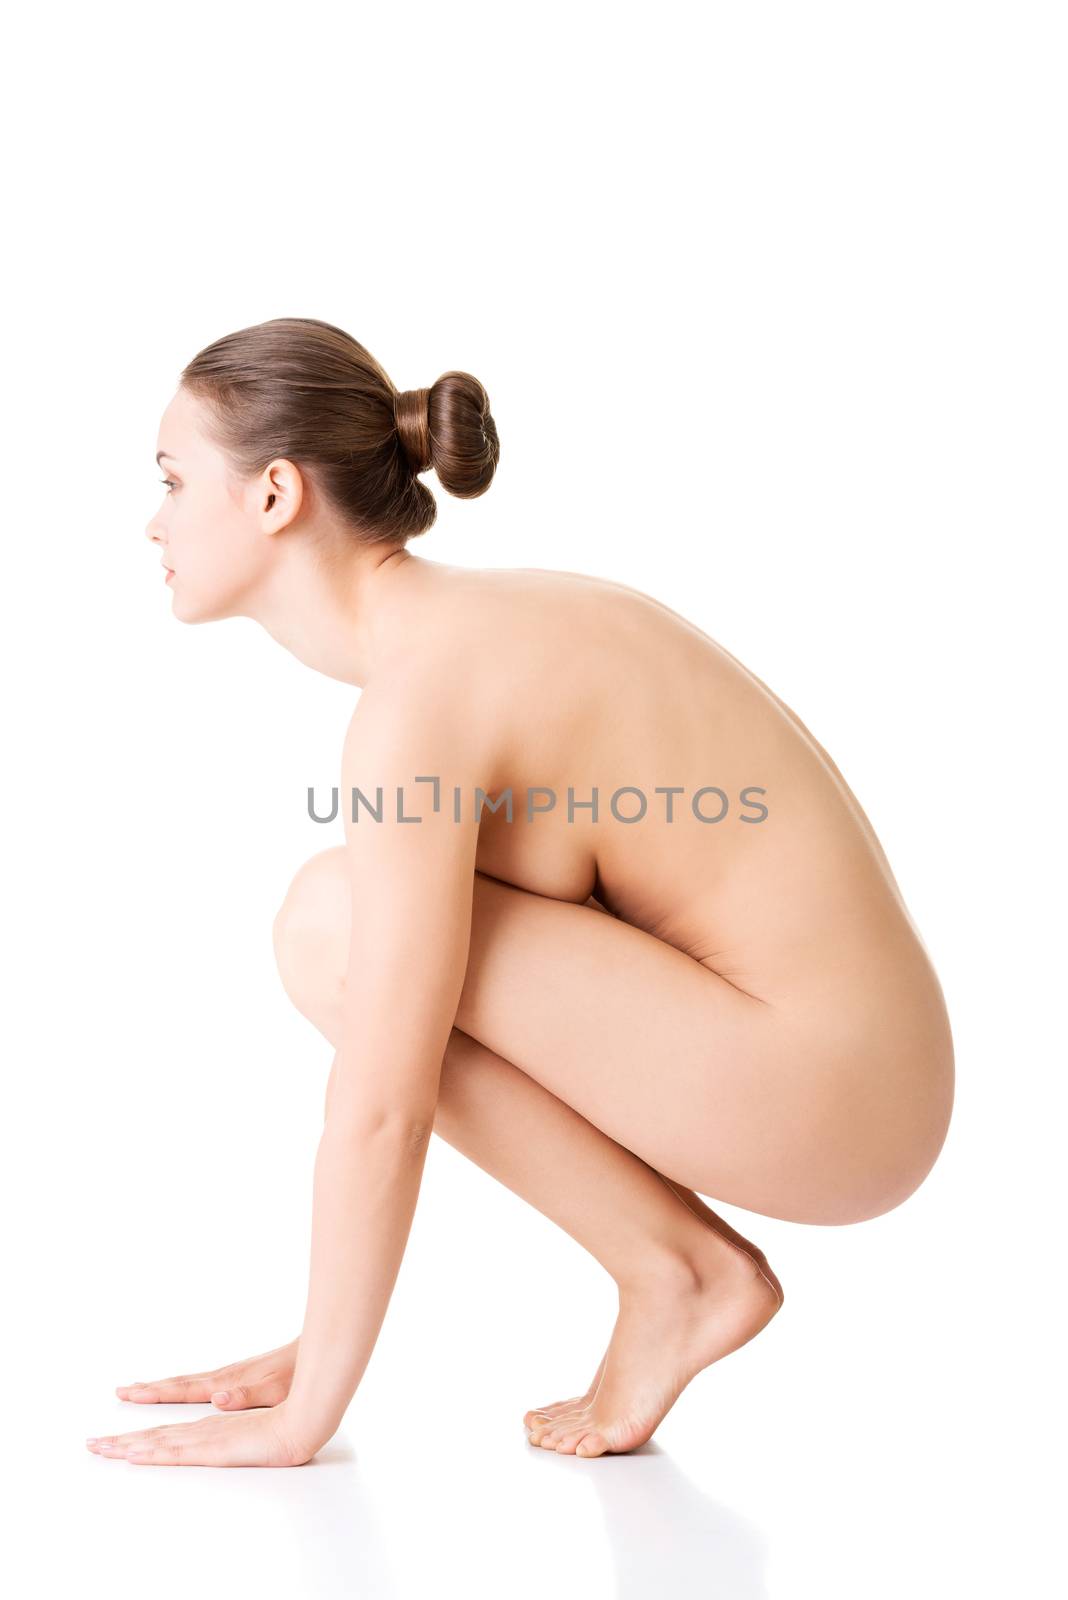 Attractive young naked woman in a crouch. Side view.isolated on white.